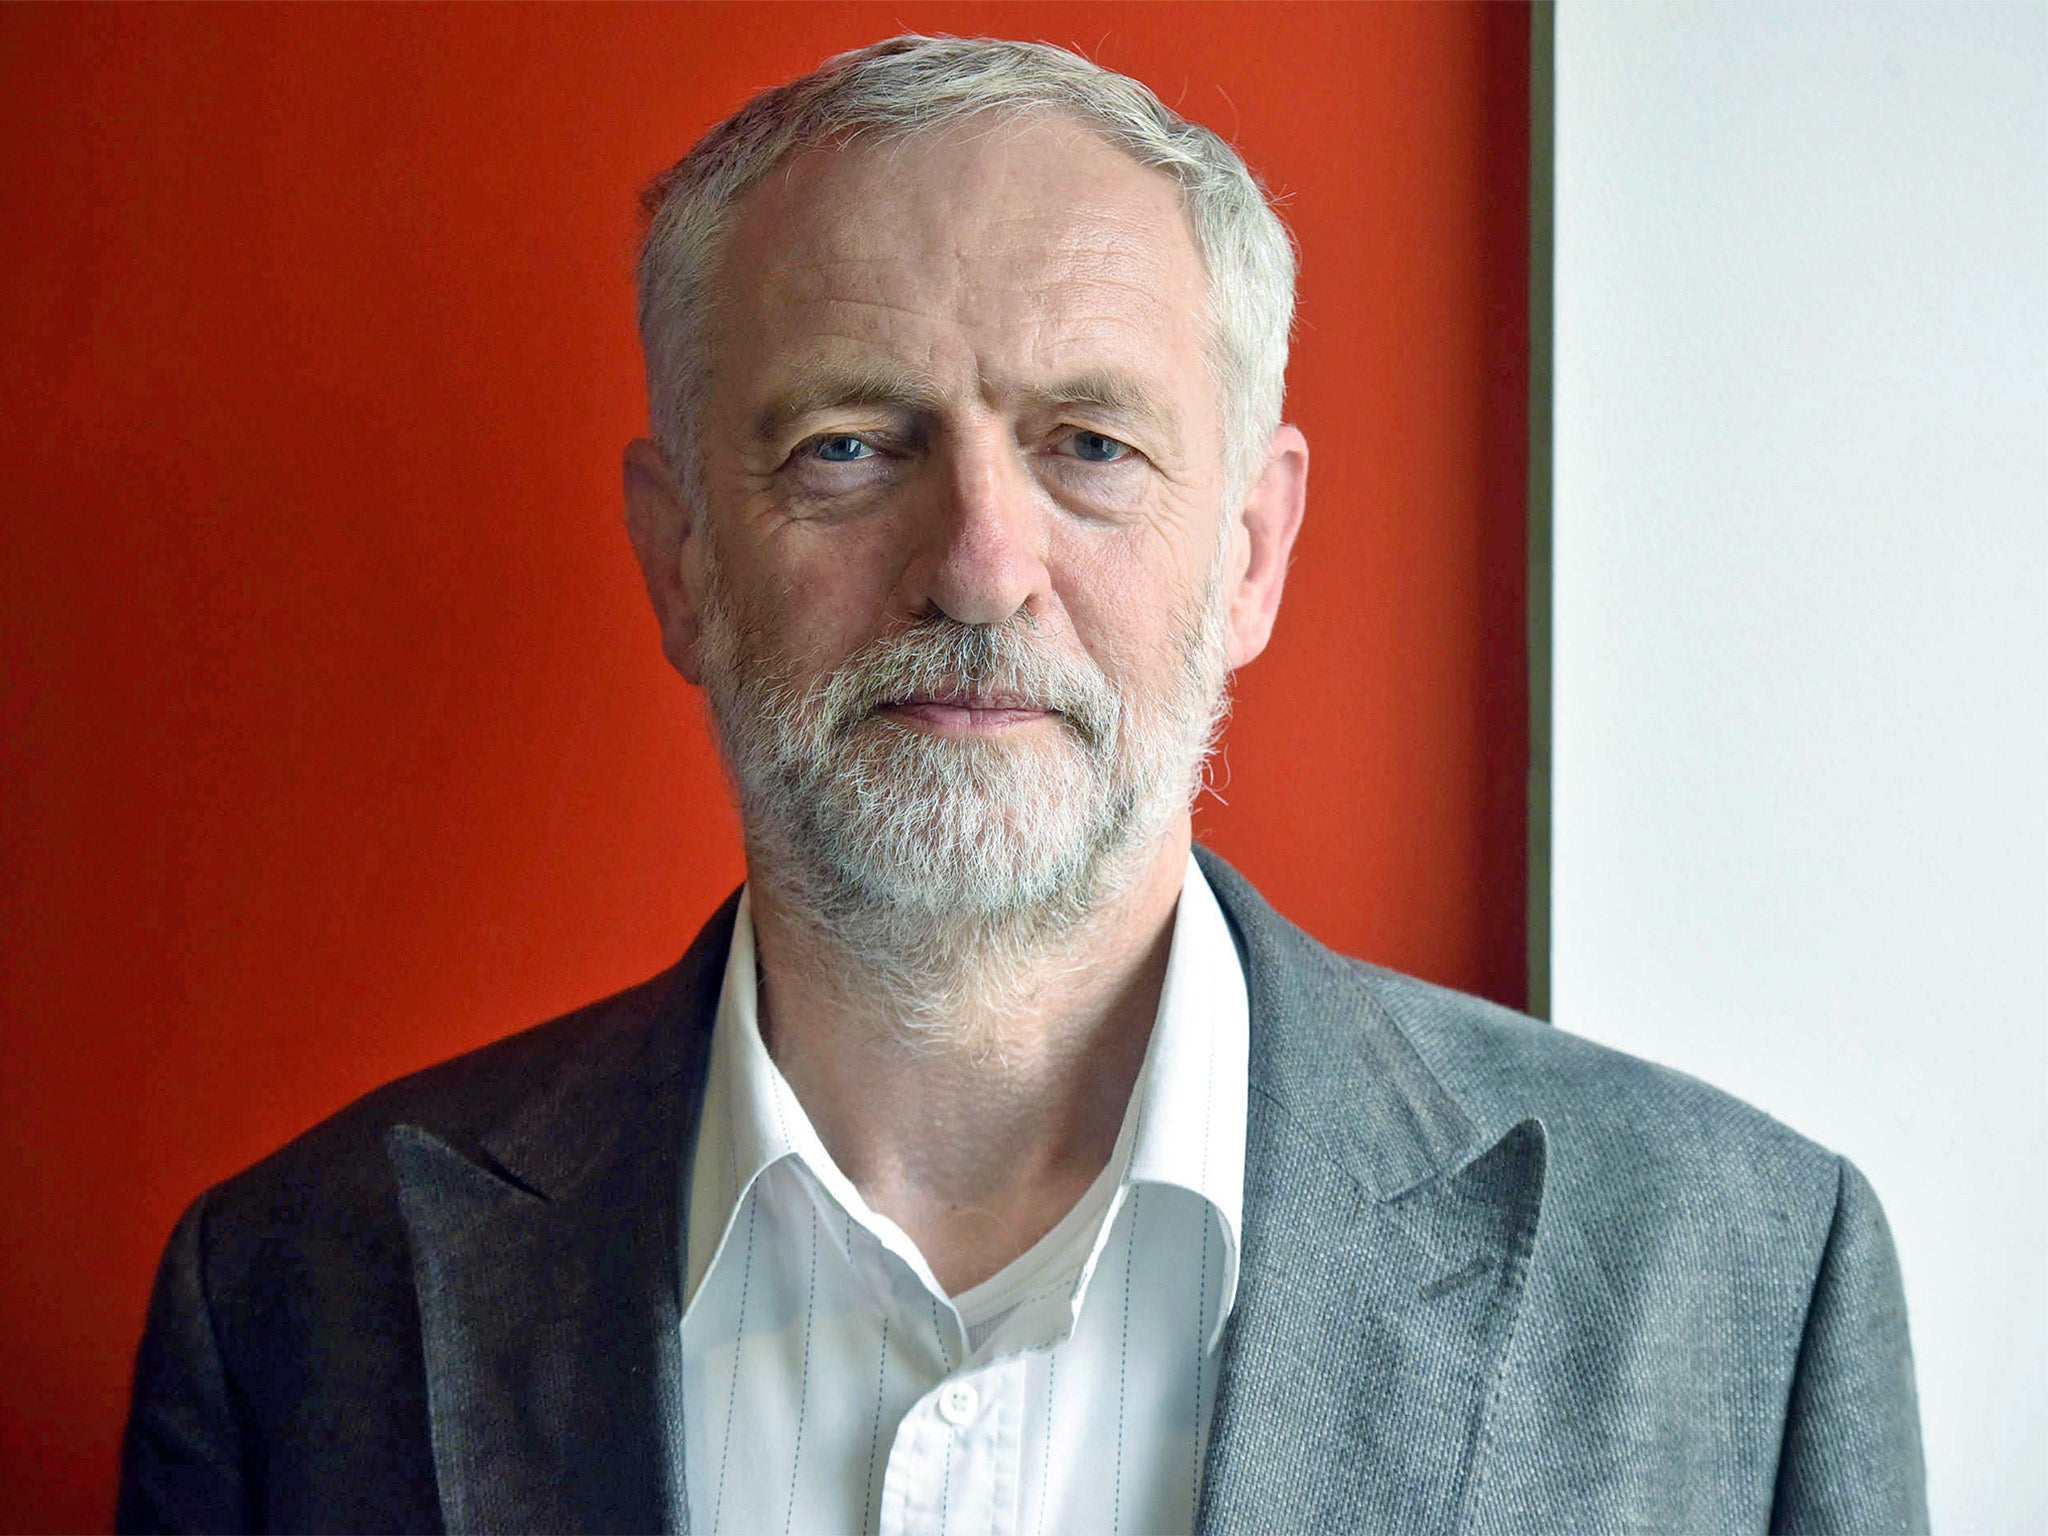 Jeremy Corbyn said a significant number of Labour MPs had privately offered their support